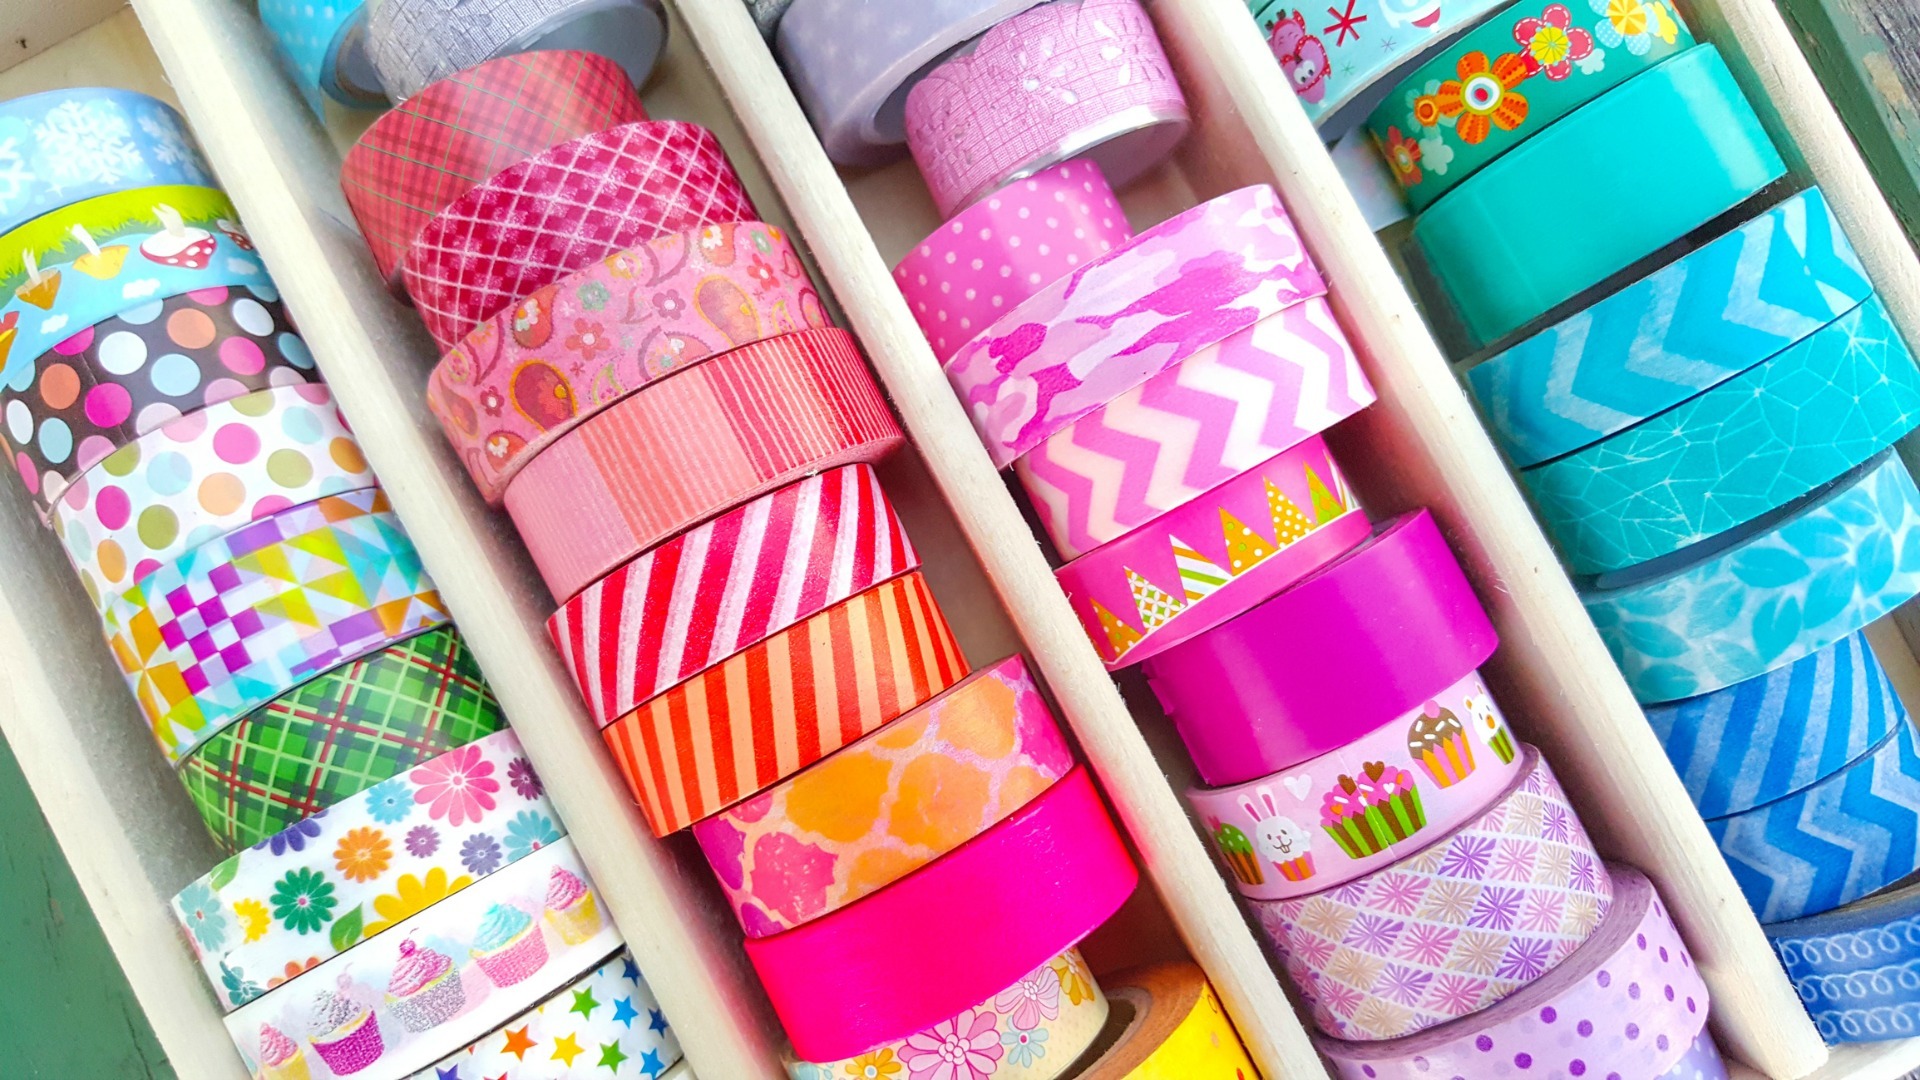 Buy The Washi Tape Online With The Help Of This Popular Website